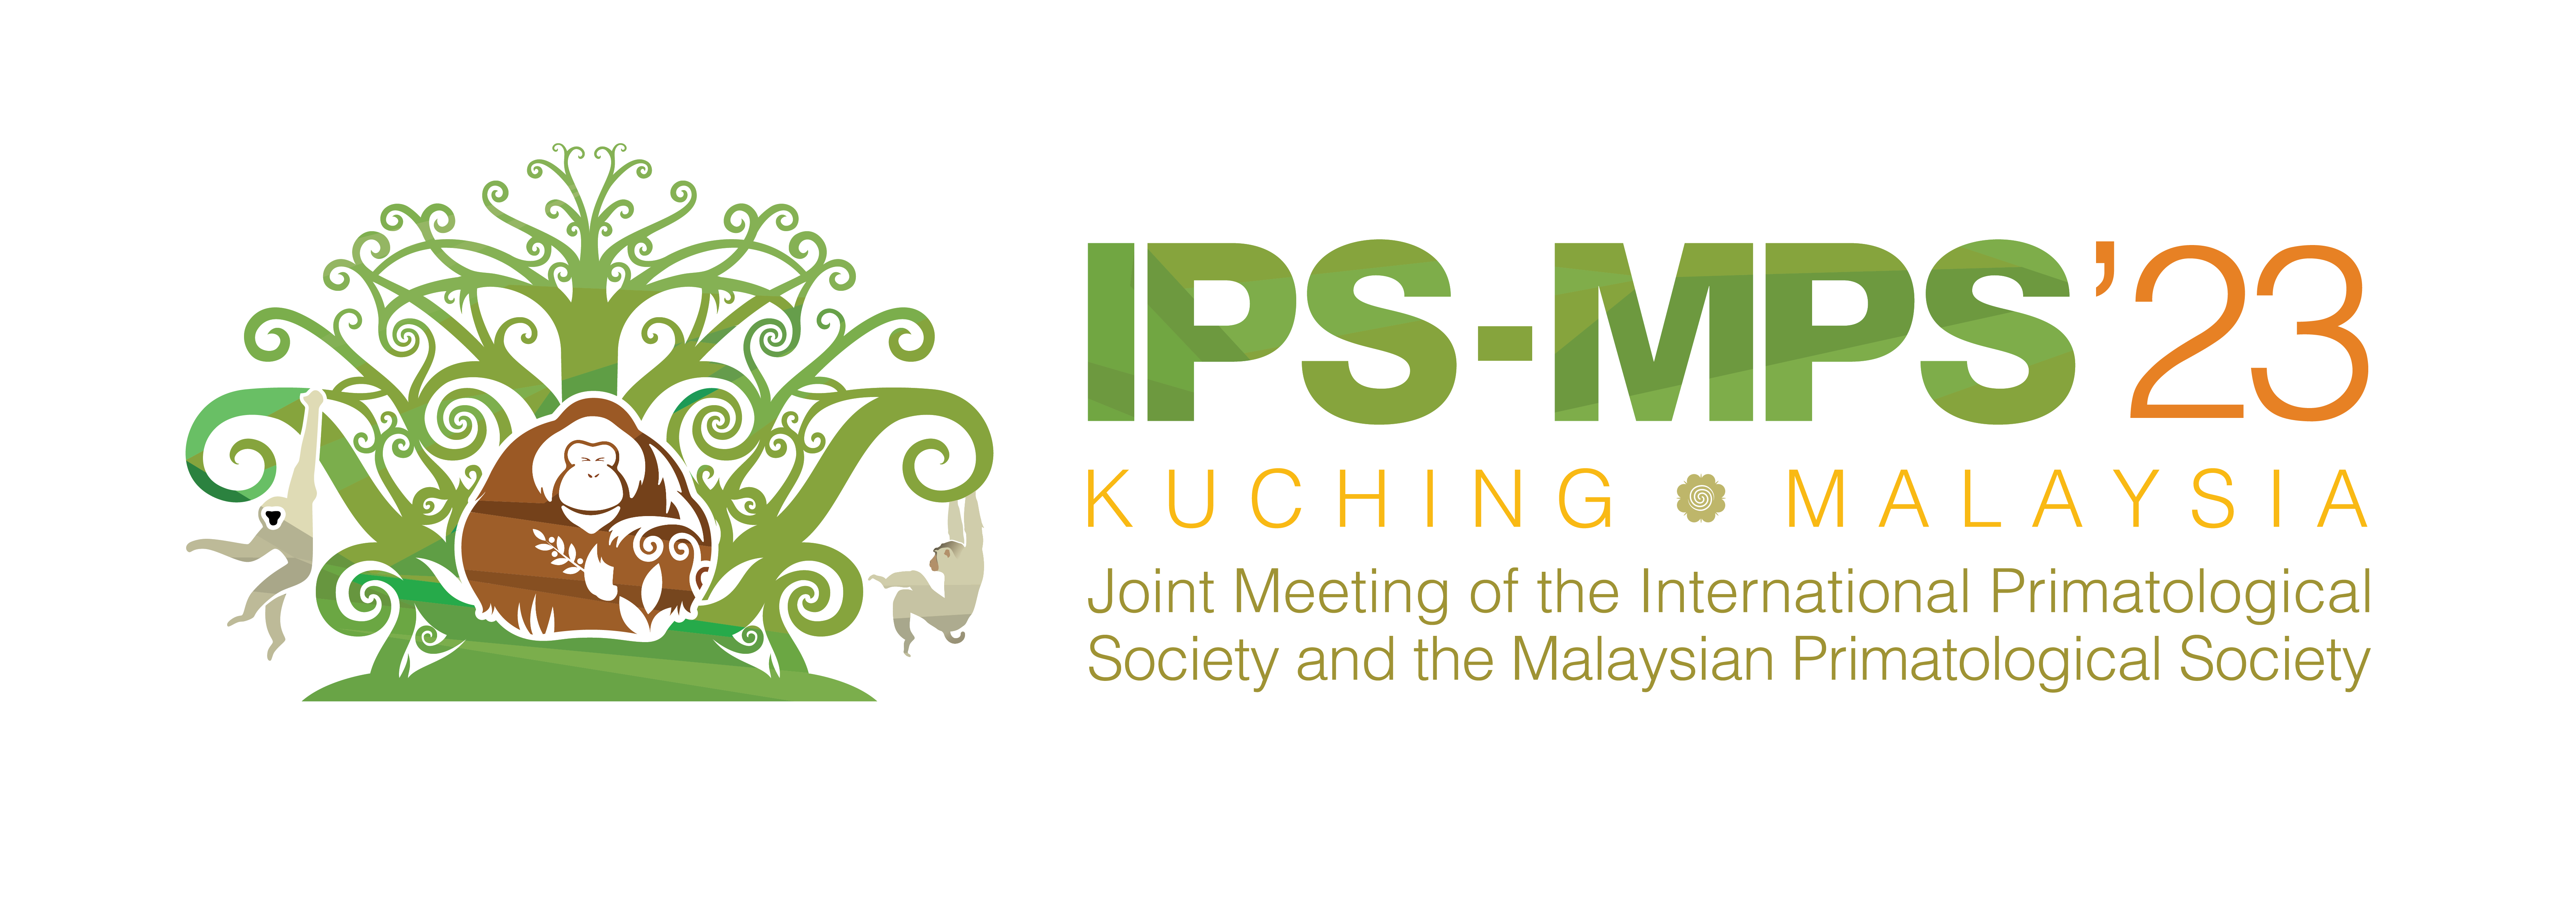 IPS - MPS Joint Meeting 2023 - logo